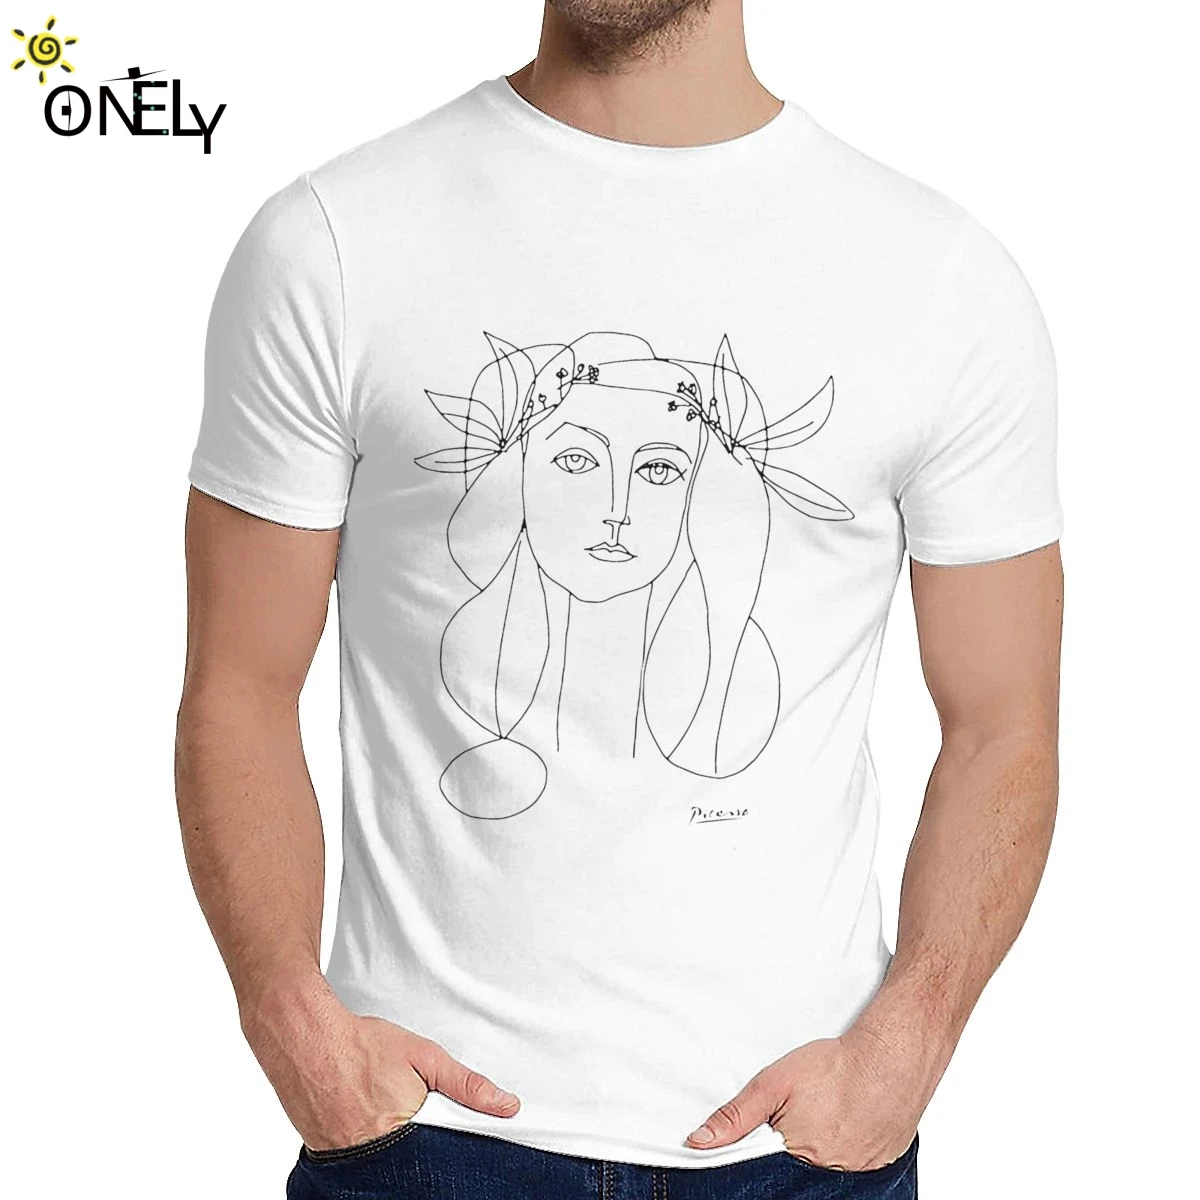 

O-neck Pablo Picasso War And Peace Design Tee Shirt 2019 New For Men Natural Cotton T Shirt Wholesale